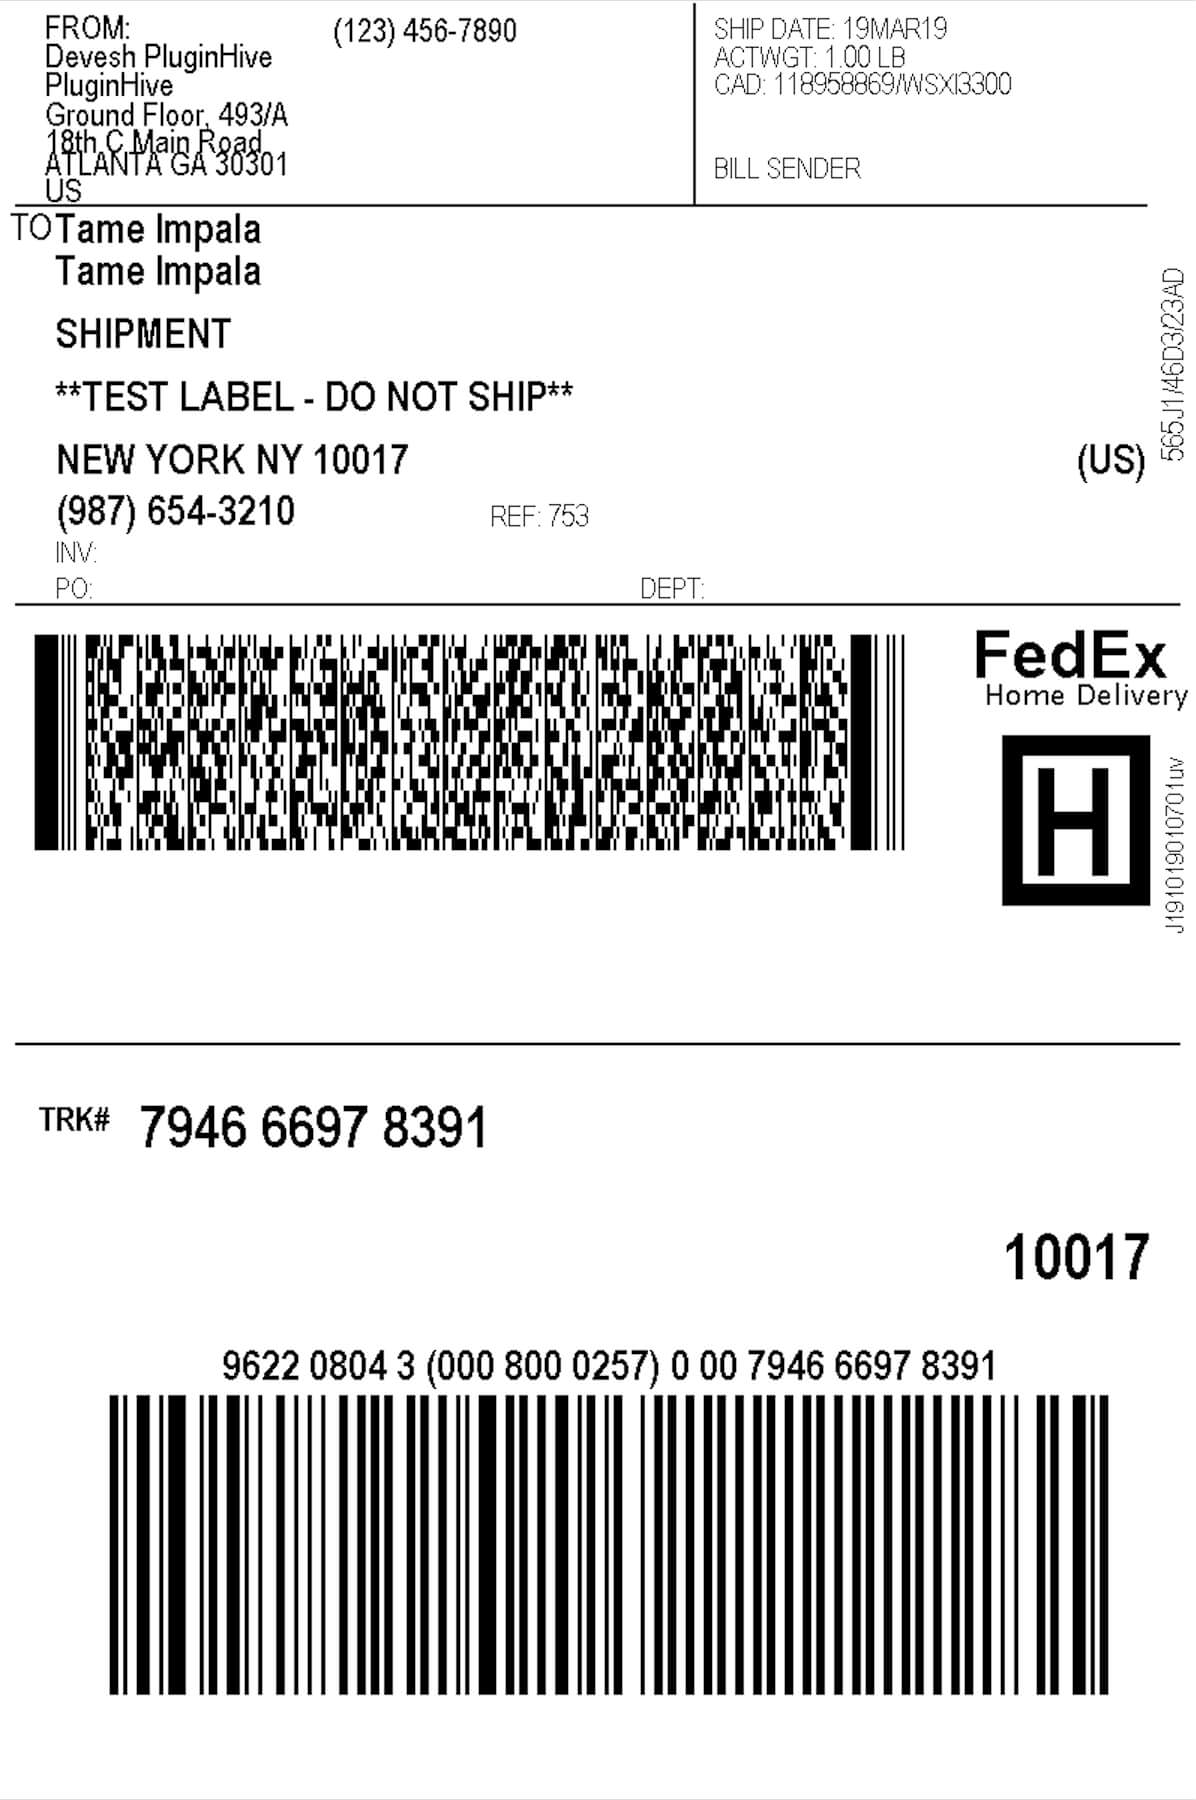 printable-fedex-freight-bill-of-lading-tutore-org-master-of-documents